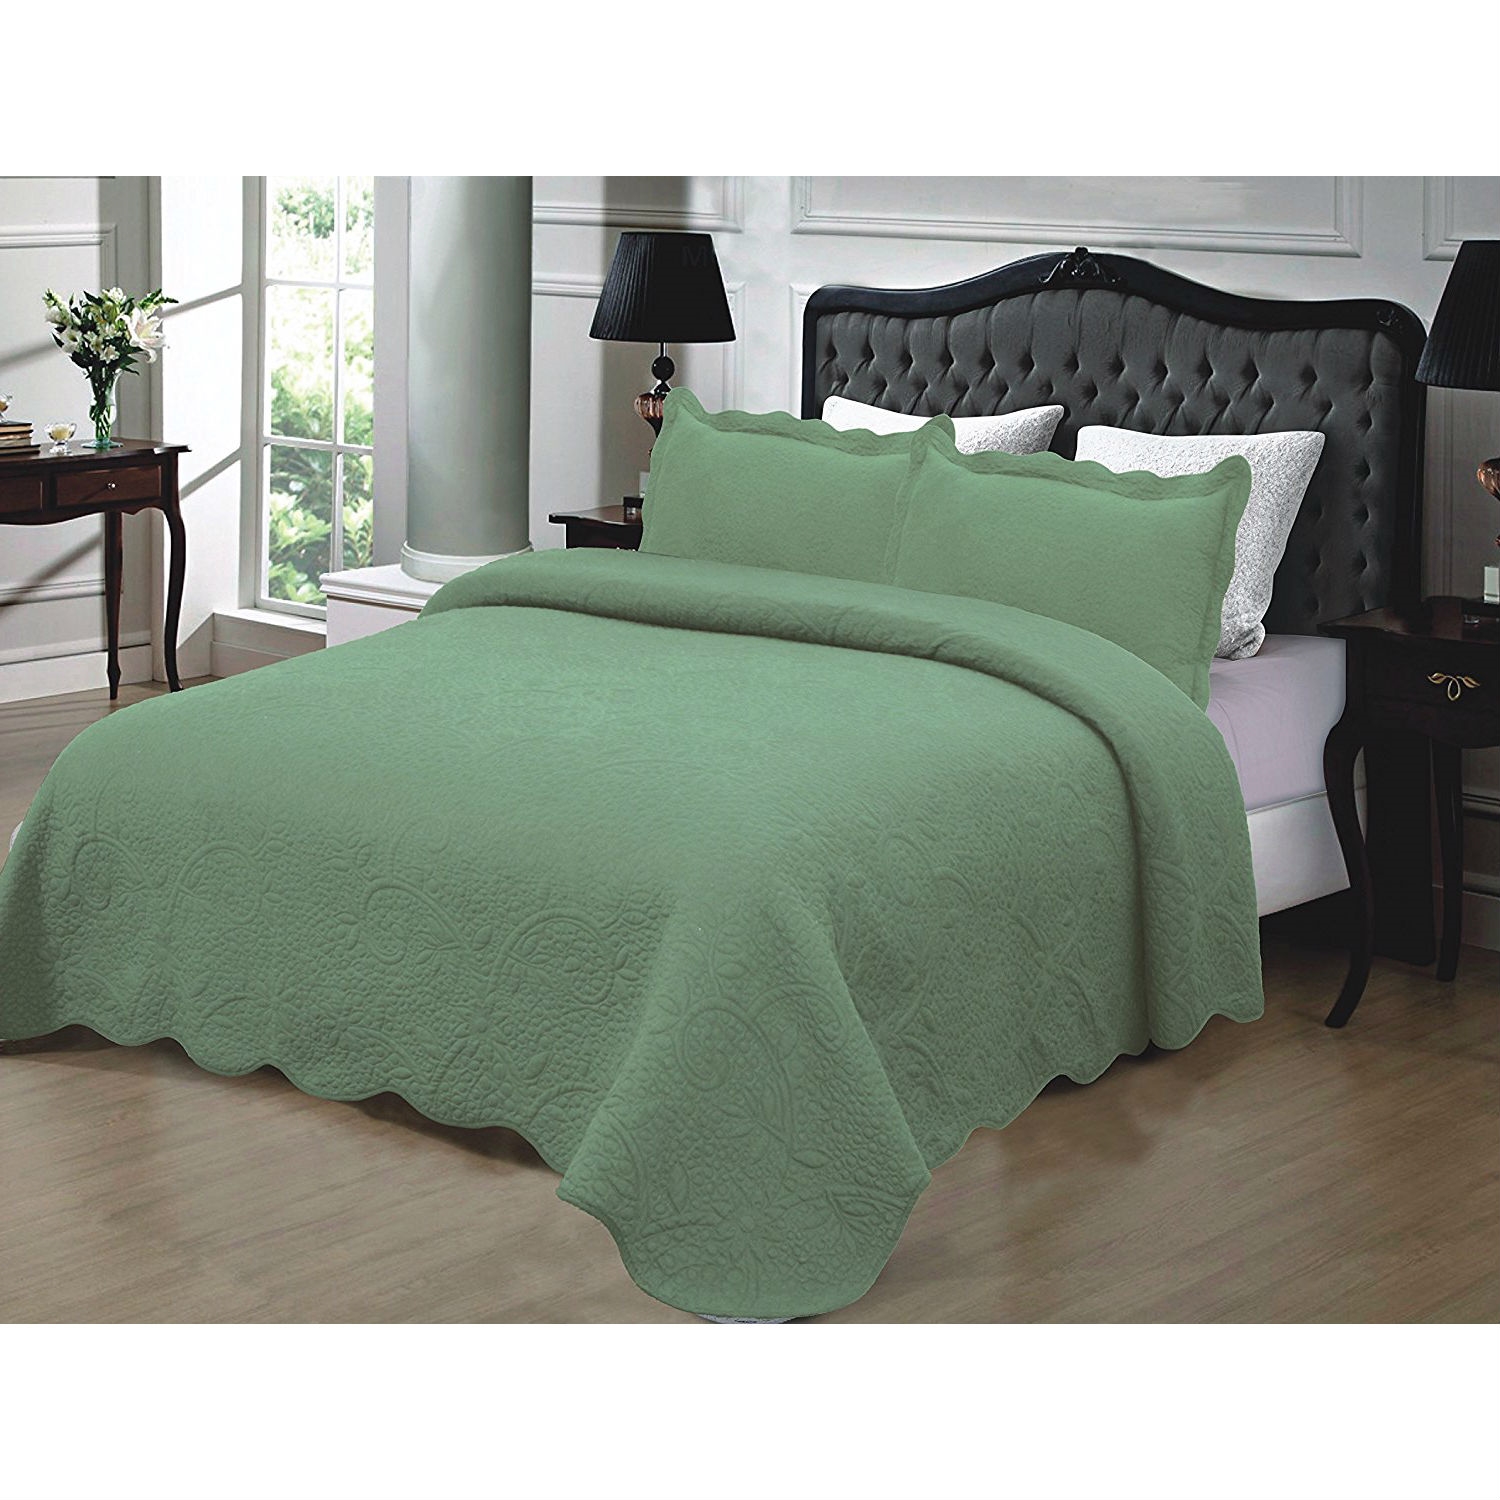 Cal King 3-Piece Quilted Cotton Bedspread with Shams in Sage Green